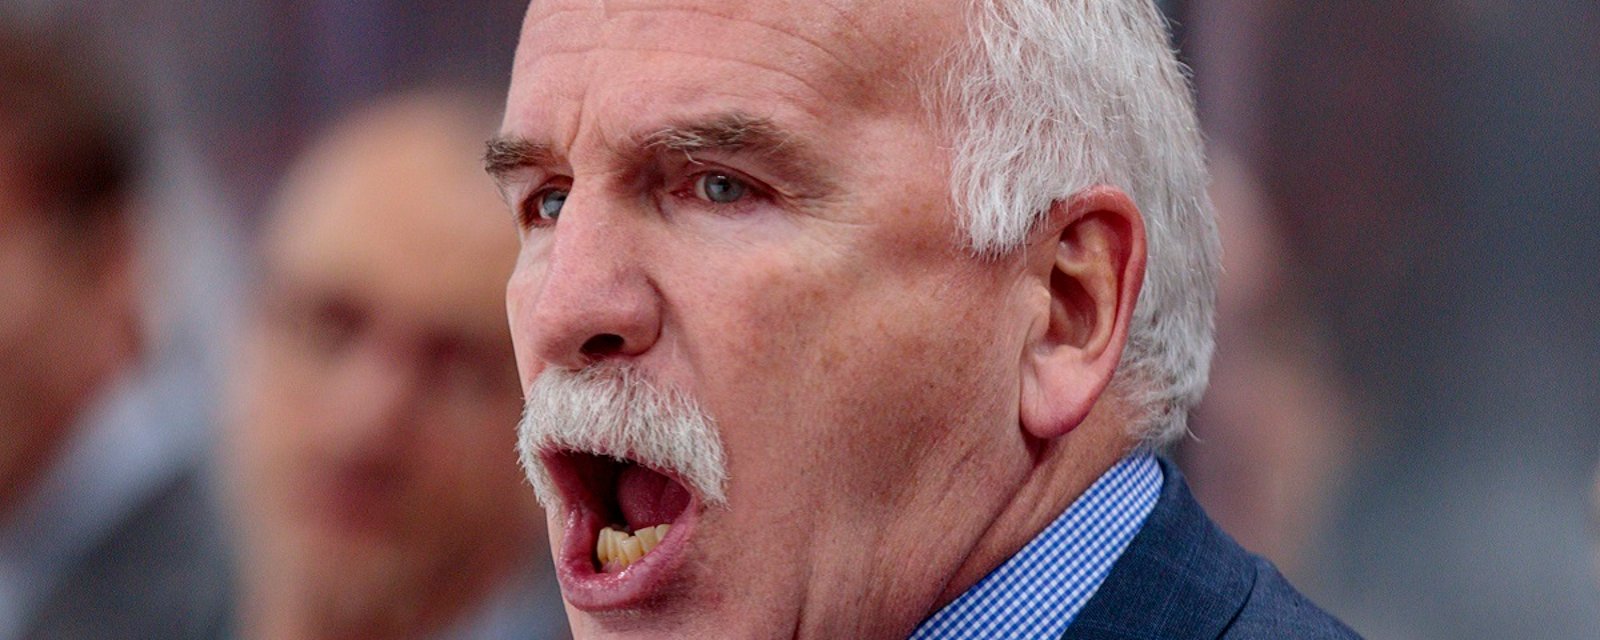 Major conflicts in reports regarding Joel Quenneville's future.